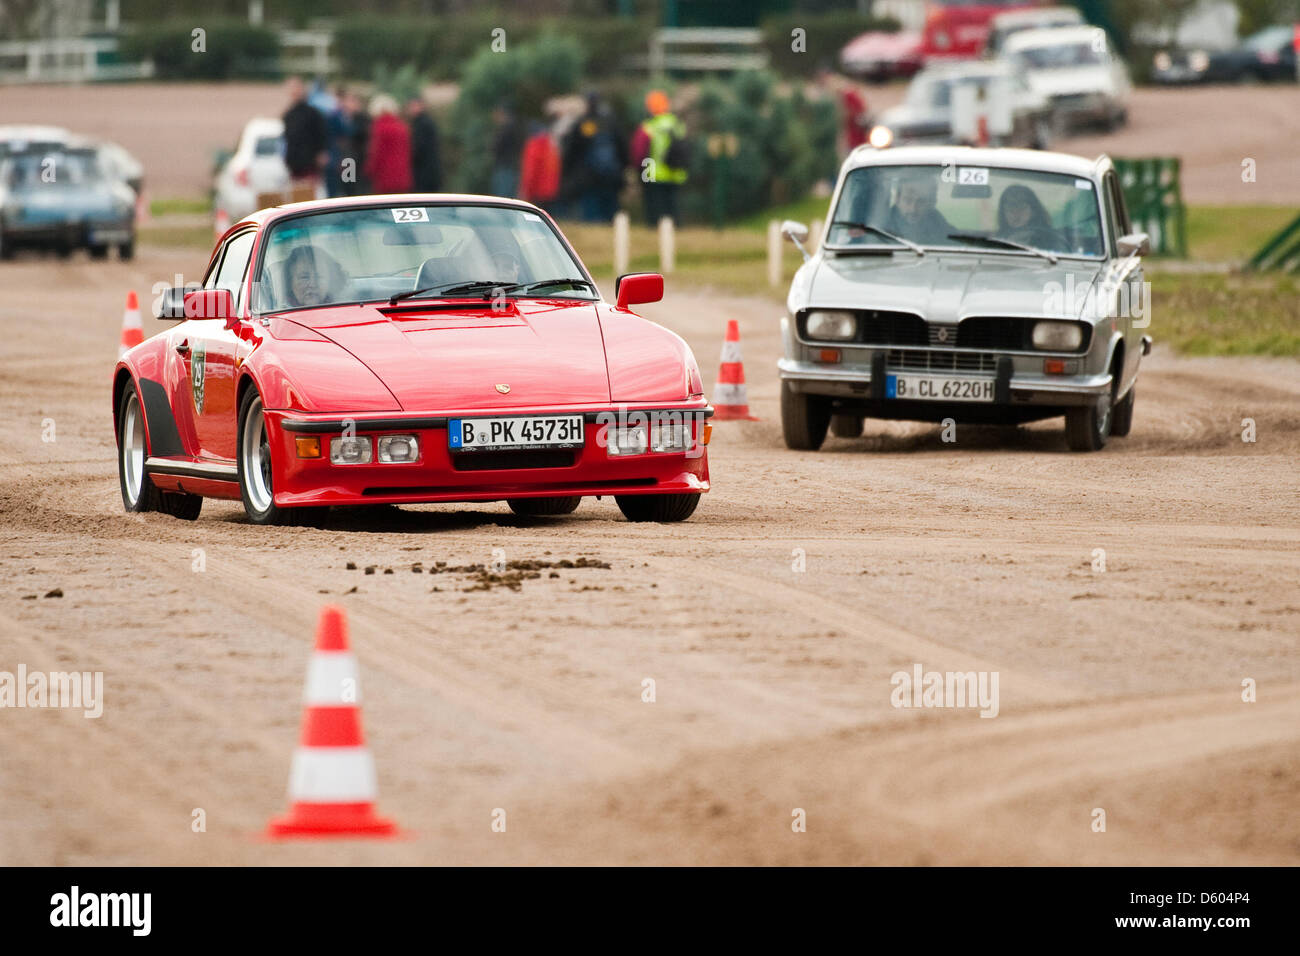 A Porsche 930 Turbo (l) and a Renault R16TL are pictured during the Oldtimer Rallye 'Revival Berlin' at Trabrennbahn Mariendorf in Berlin, Germany, 10 November 2012. More than 50 historical automobiles compete for highest speed, some of them are piloted by former motor sportsmen. Photo: Robert Schlesinger Stock Photo